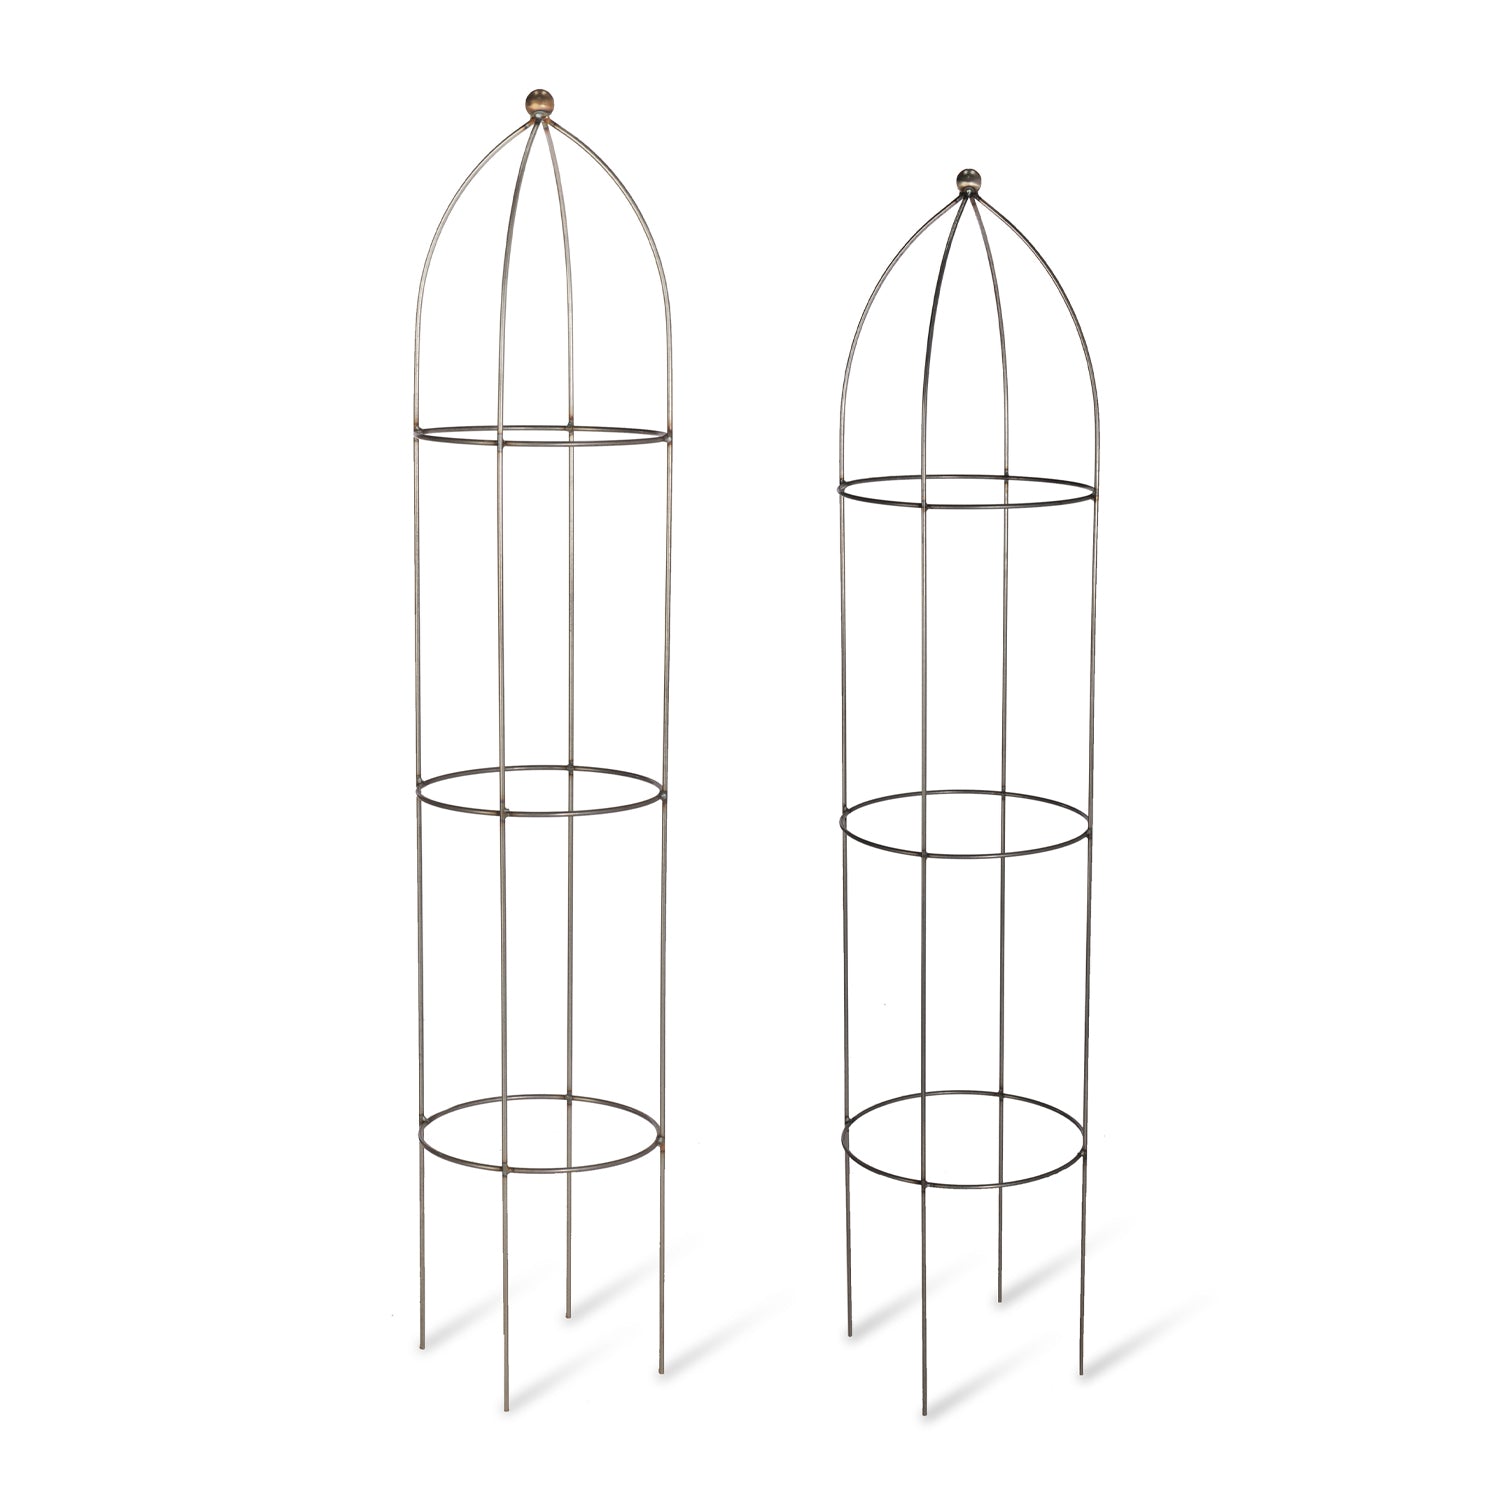 Set of 2 Barrington Obelisk Plant Supports Raw Metal by Garden Trading